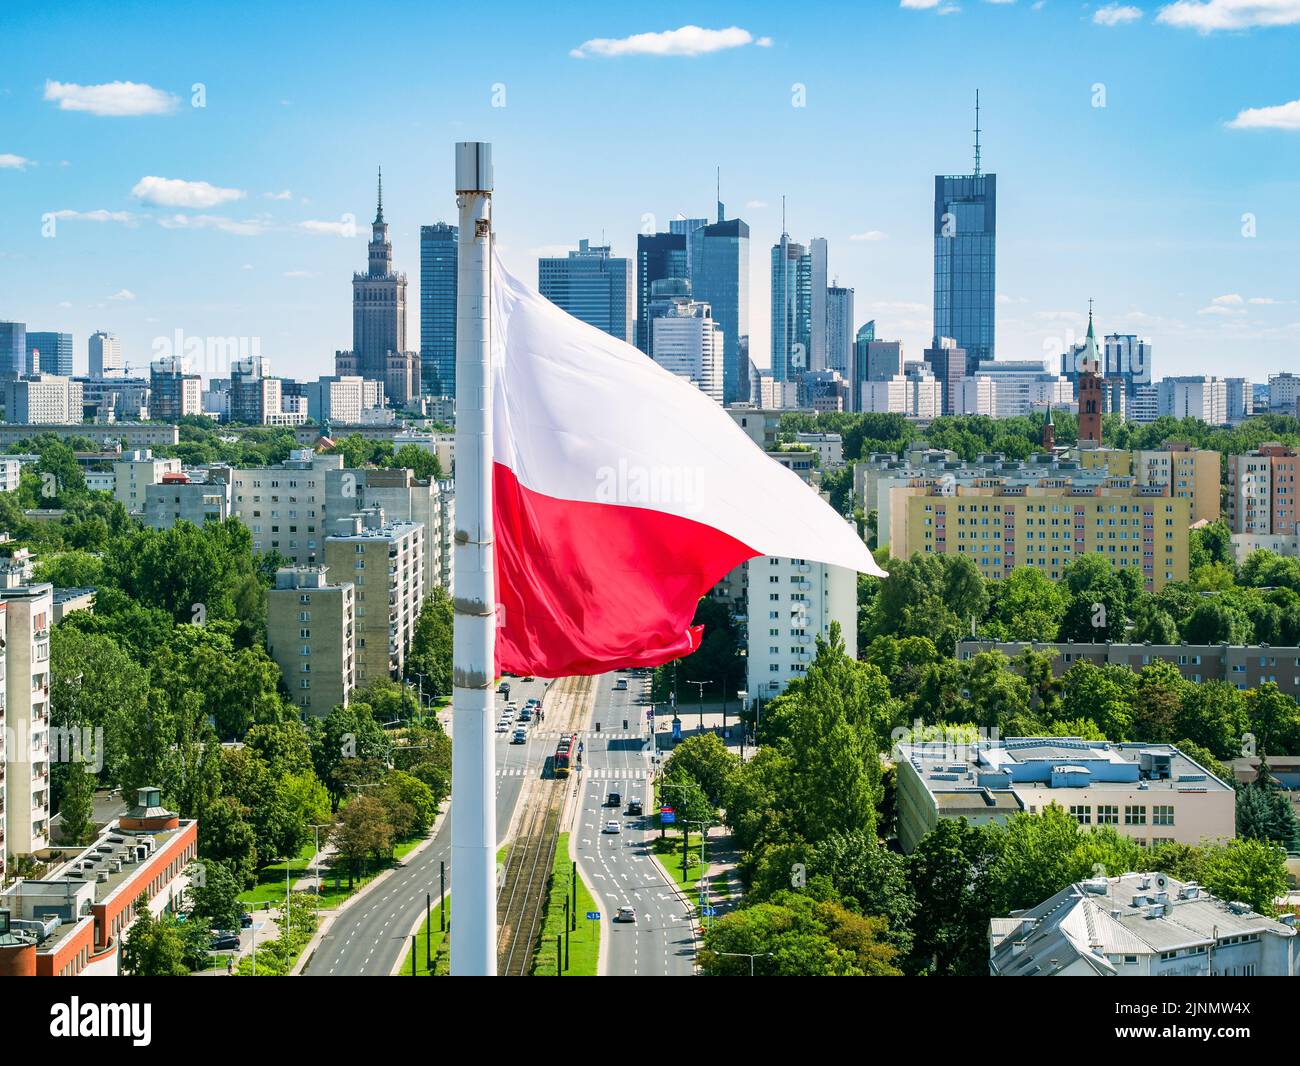 Polish national flag against skyscrapers in Warsaw city center, aerial landscape under blue sky Stock Photo